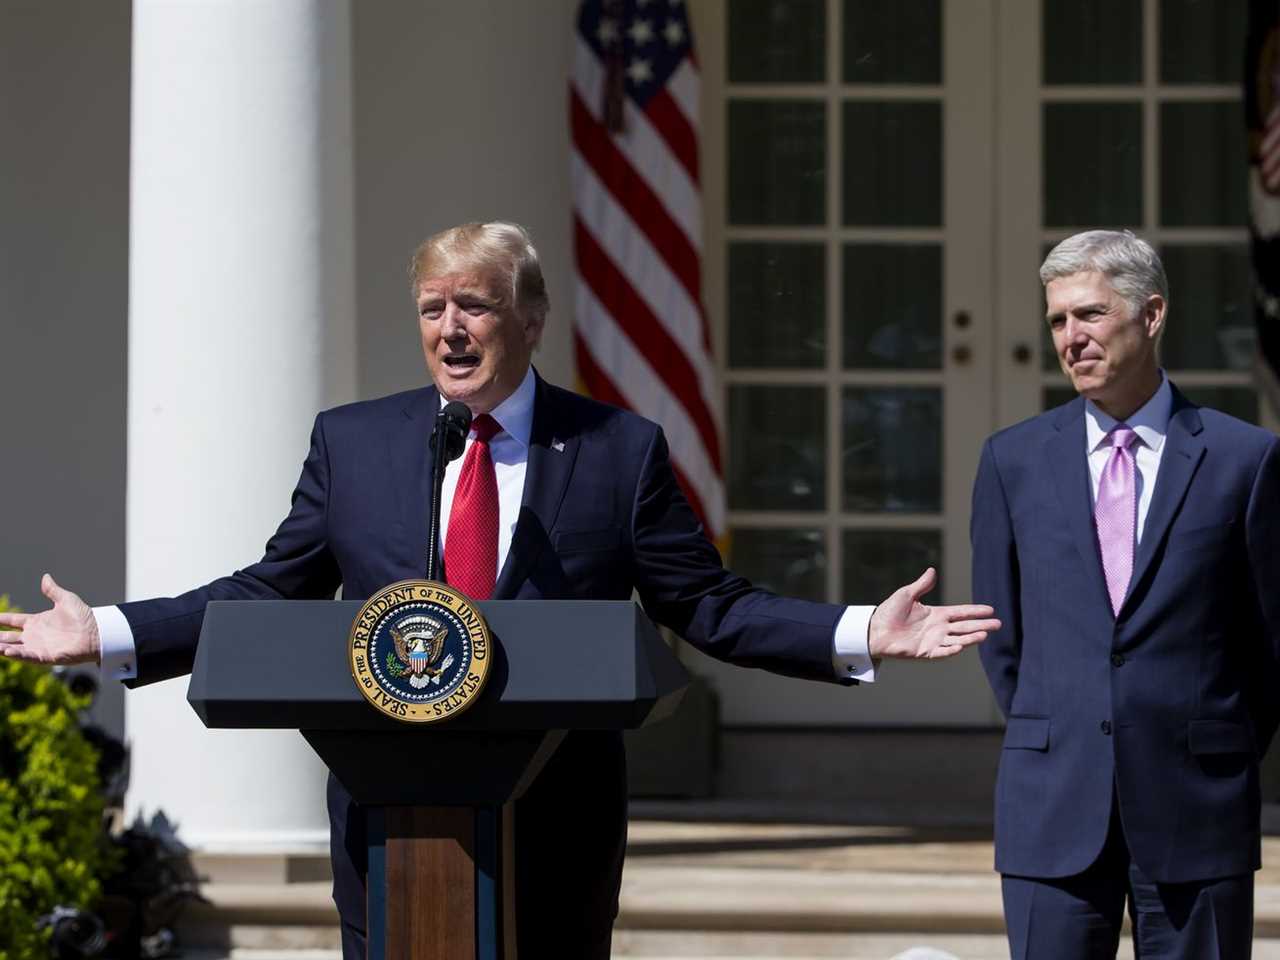 The Supreme Court has just given Trump an astounding victory